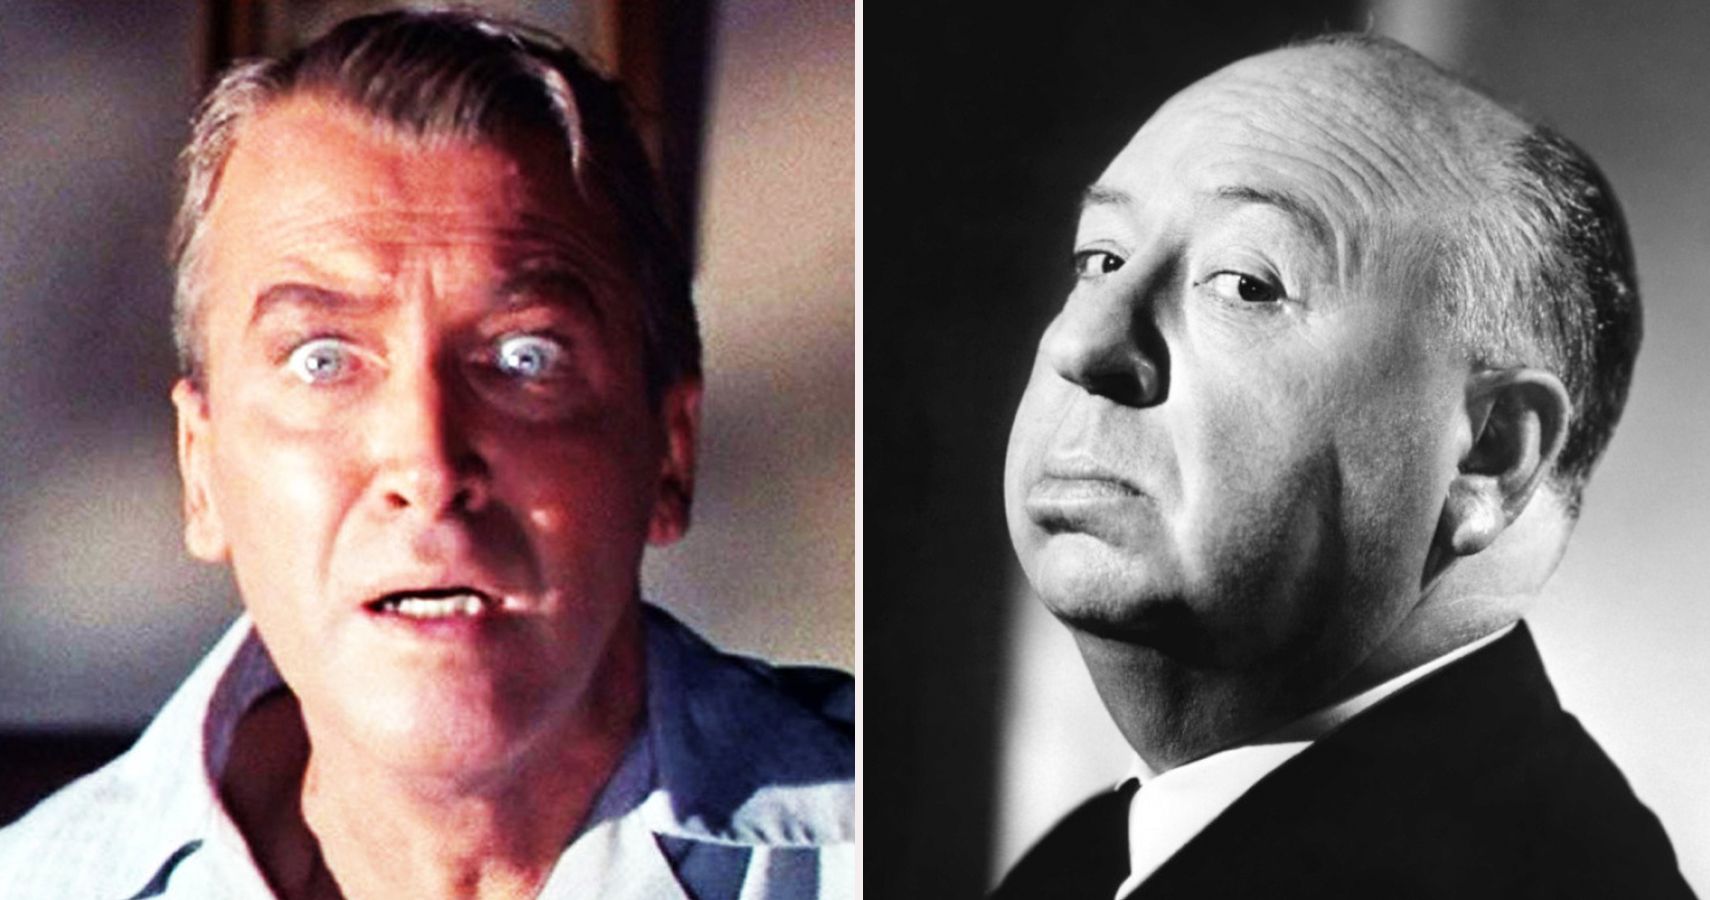 Alfred Hitchcock His 5 Best (And 5 Worst) Films According To IMDb